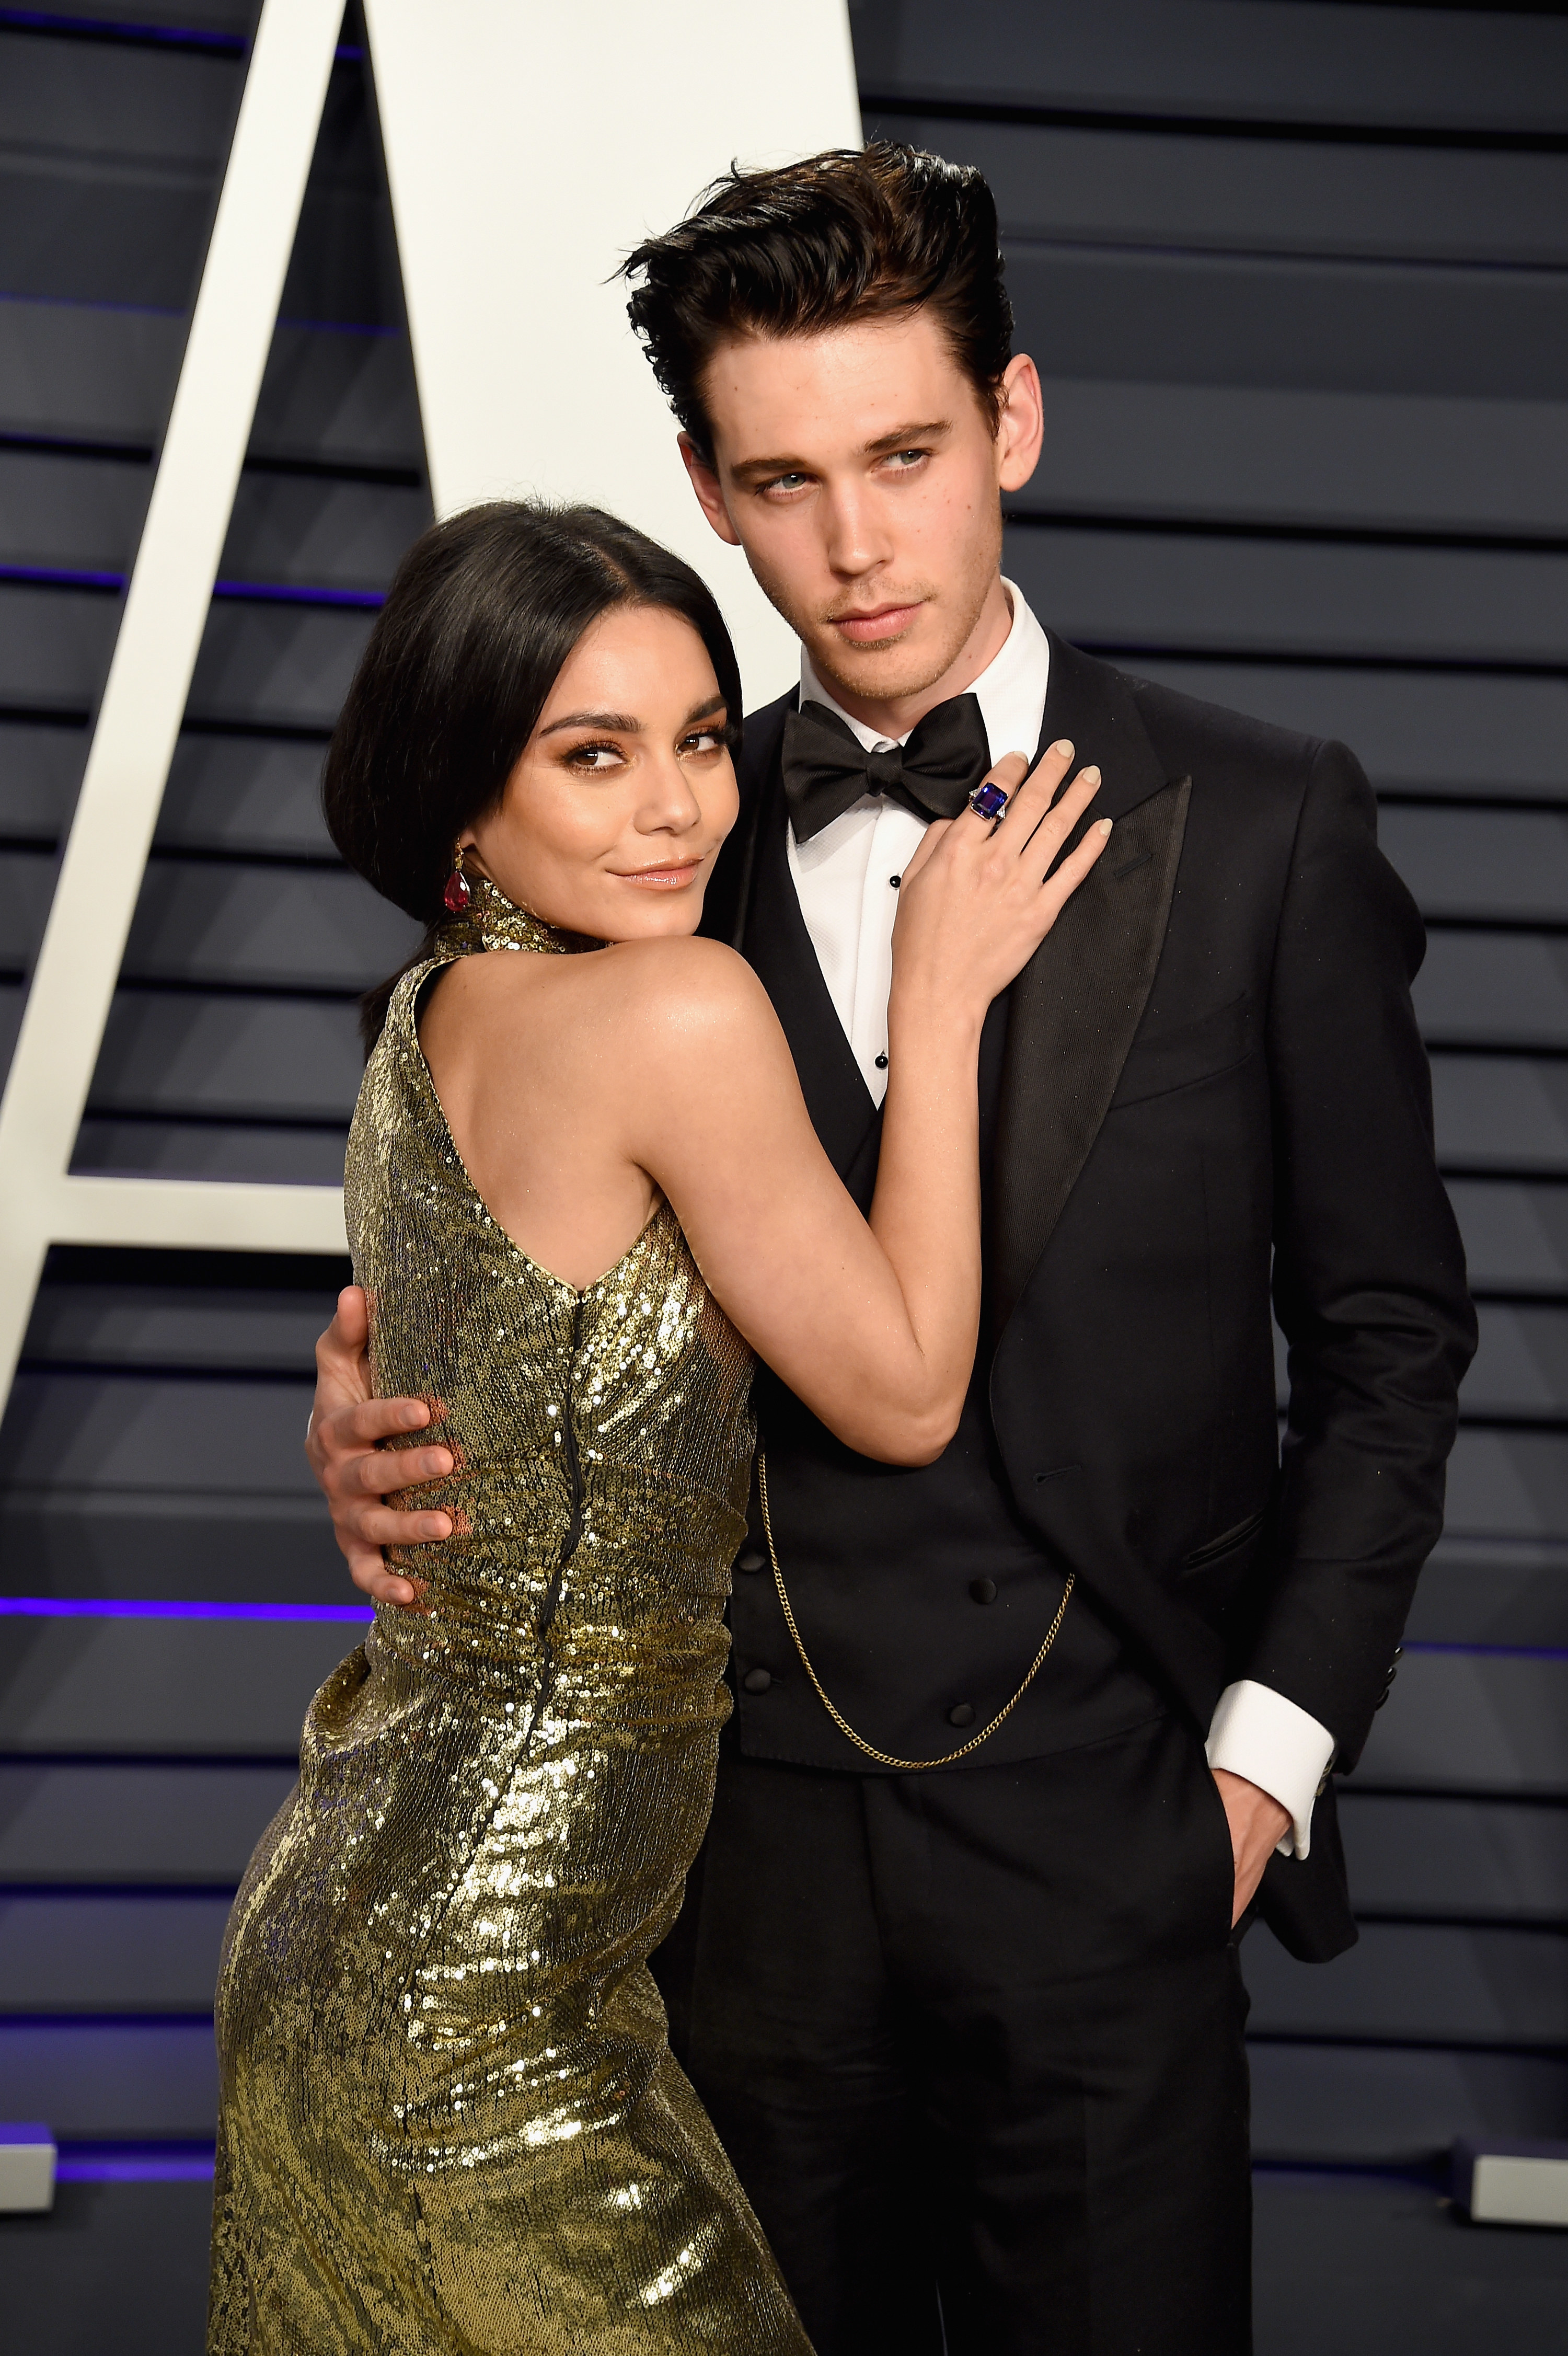 Vanessa Hudgens Encourages 'Peace' After Run-in With Austin Butler